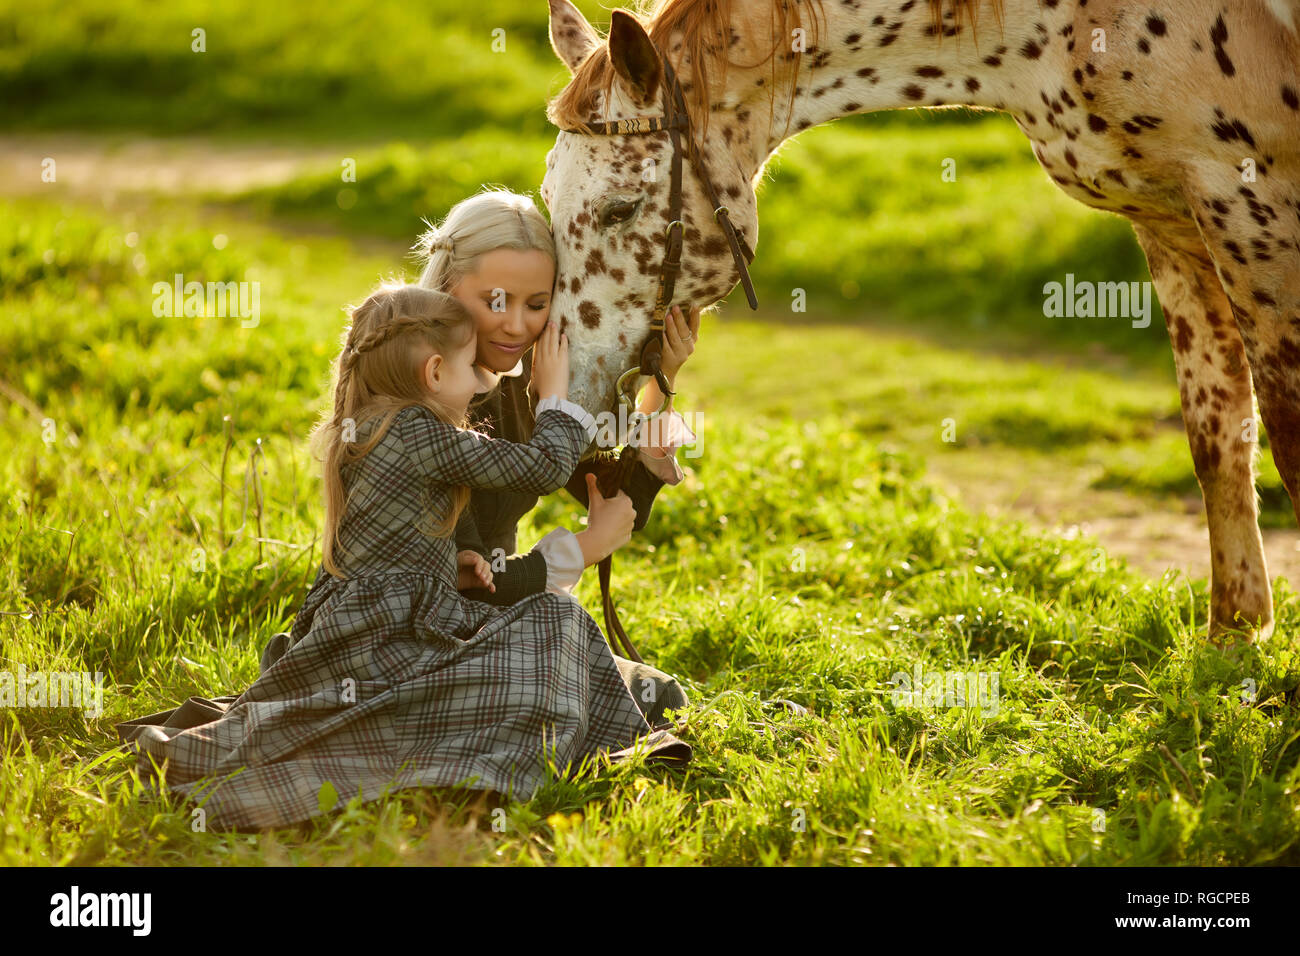 Horse and little girl cuddle with the woman, summer background with green grass Stock Photo